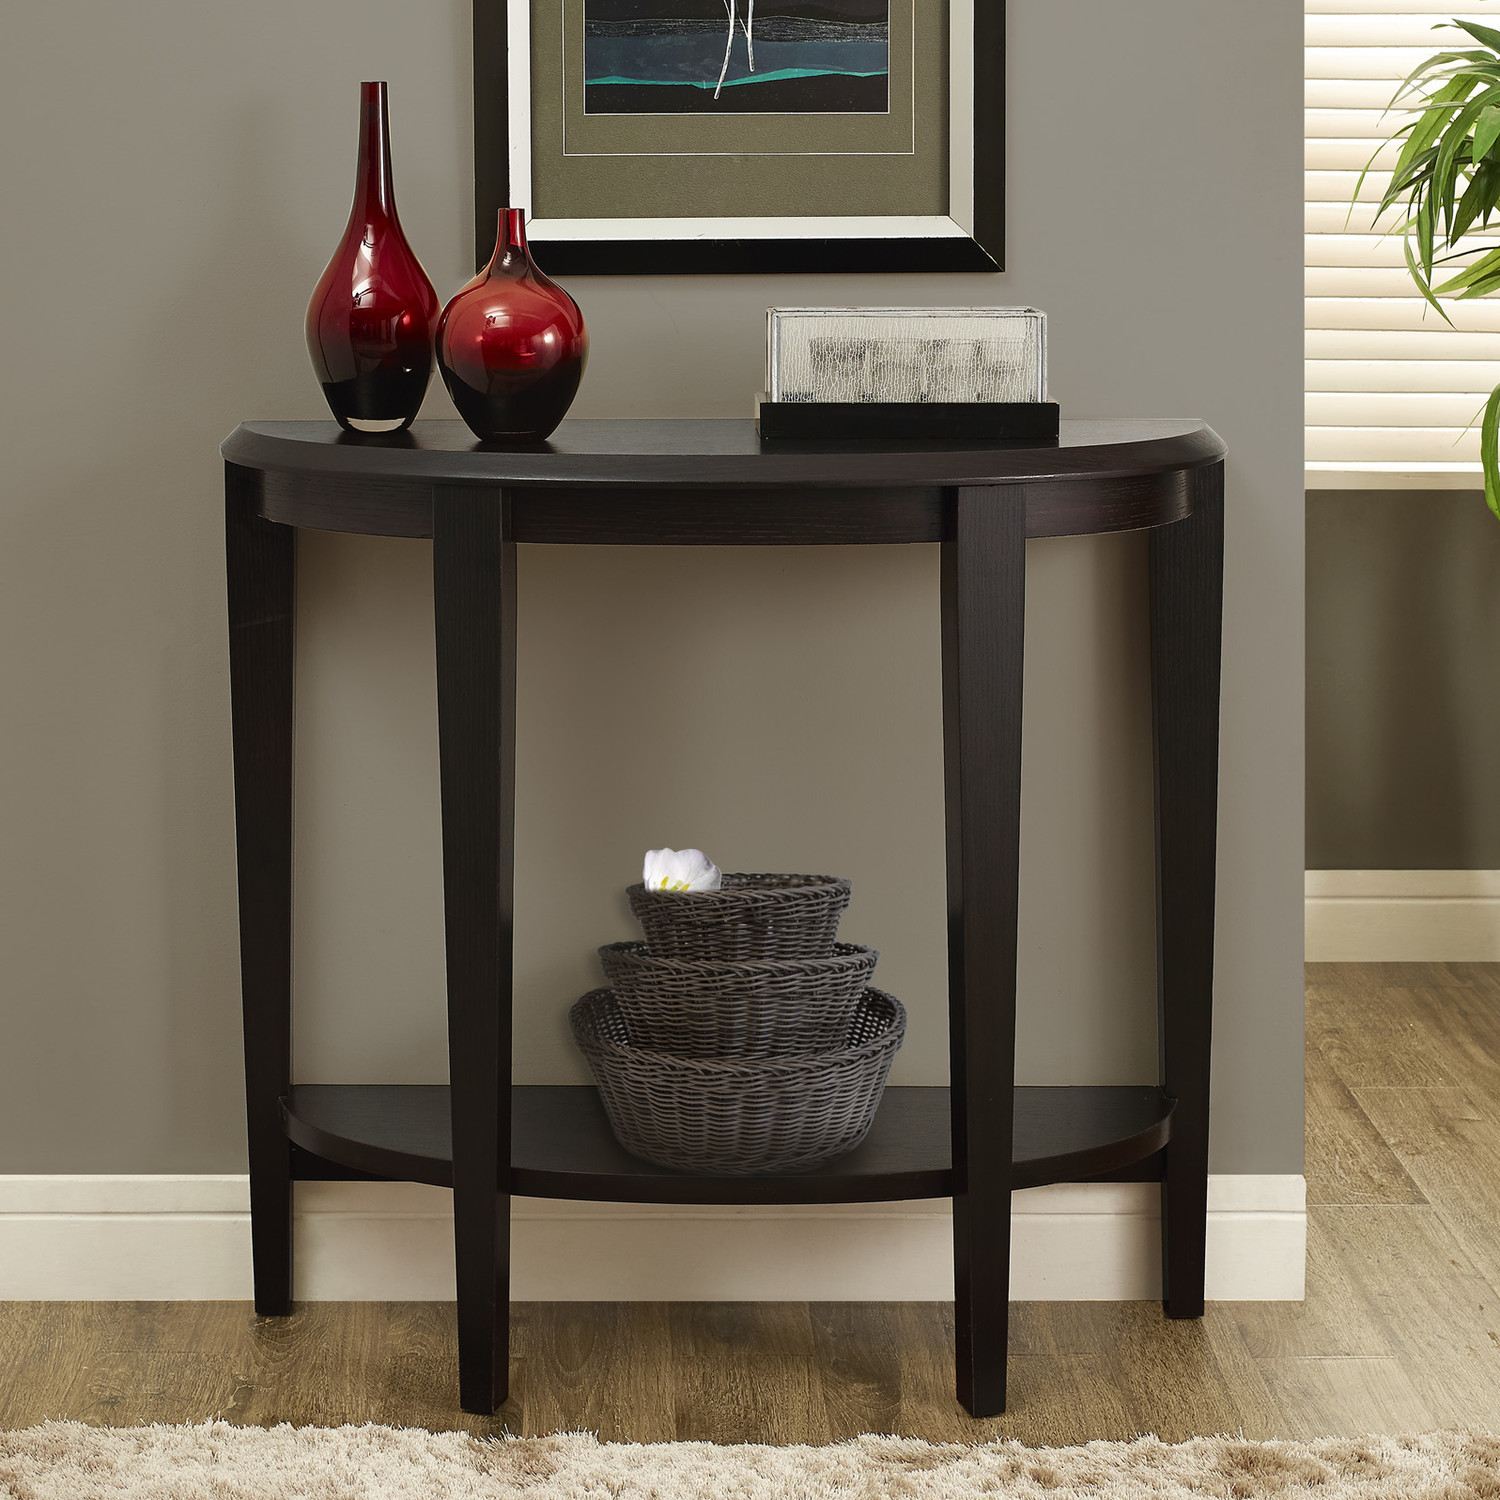 furniture mesmerizing half moon accent table with elegant looks amusing appealing black whitewashed office and near gray wall paint brown rug dining entry semi circle console moo